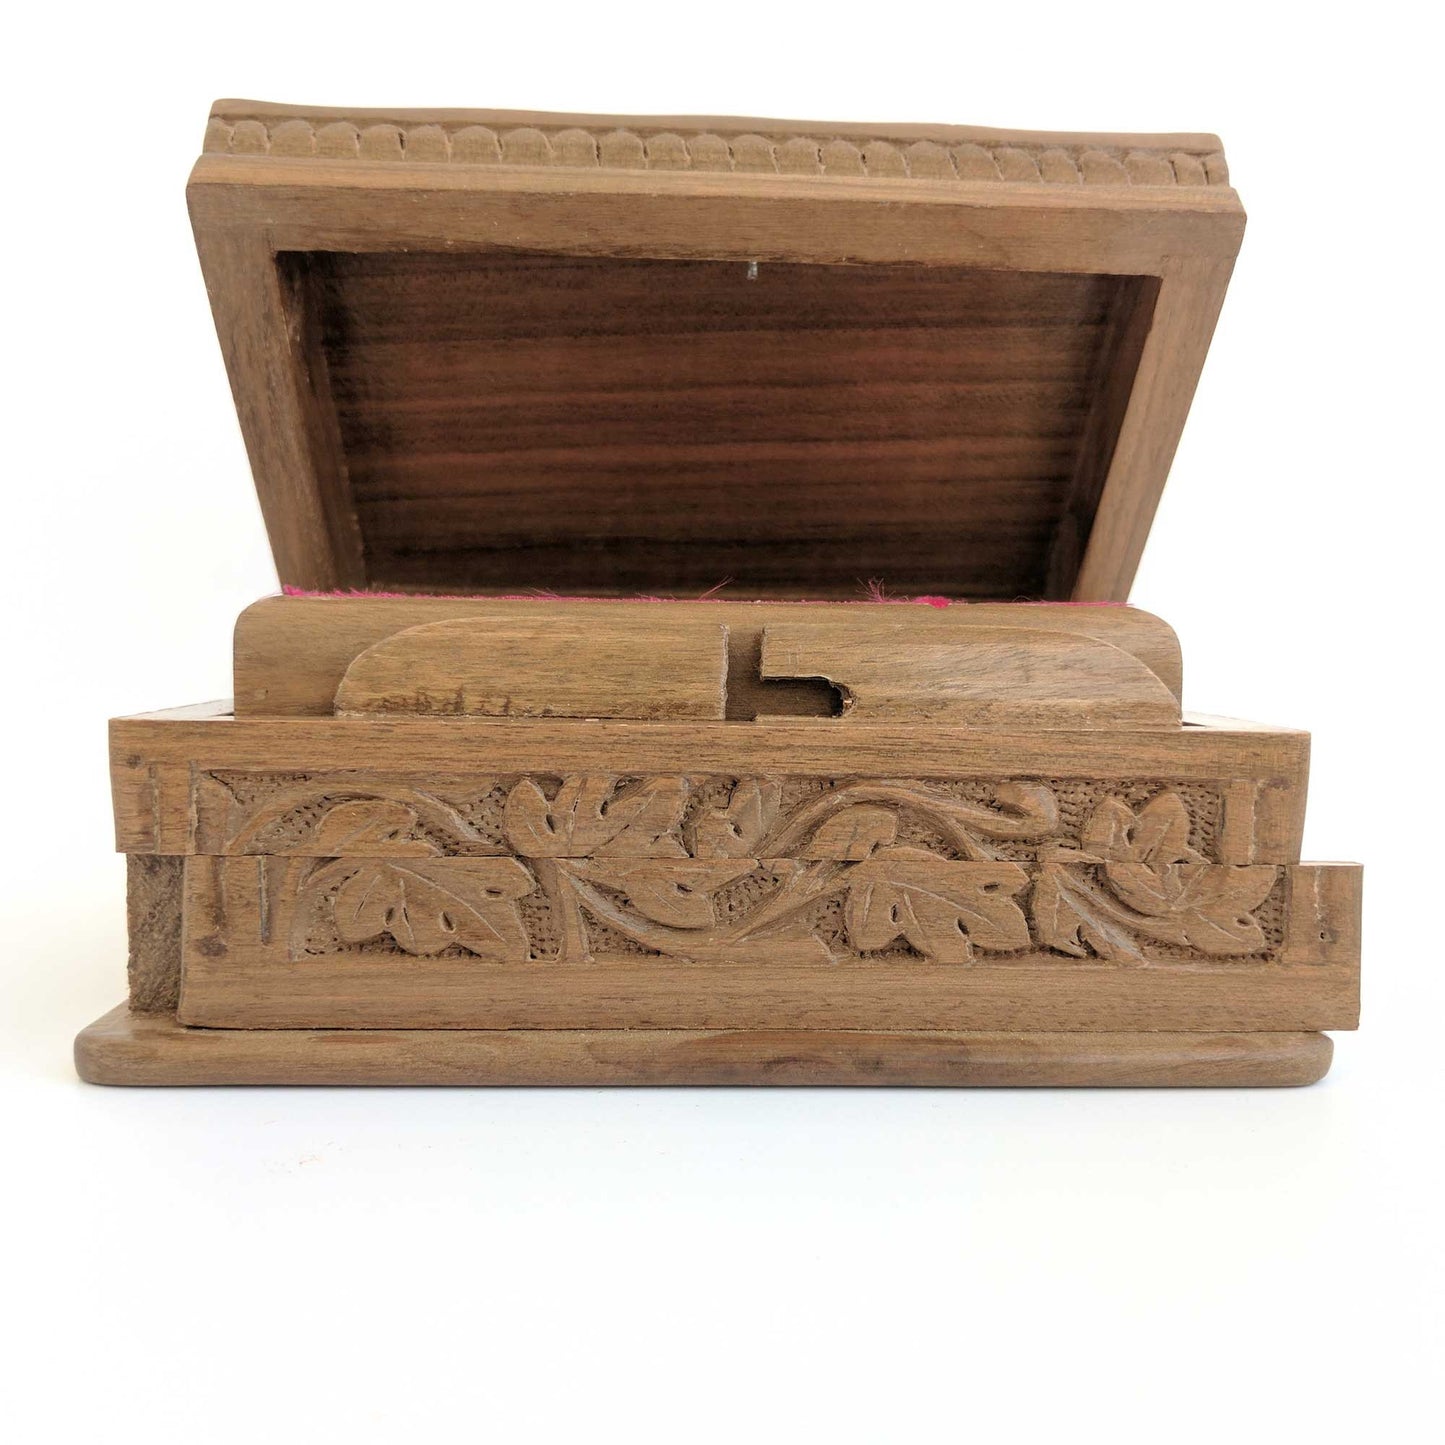 Secret Box made from walnut wood and hand carved flowers and leaves pattern to keep your jewelry safe